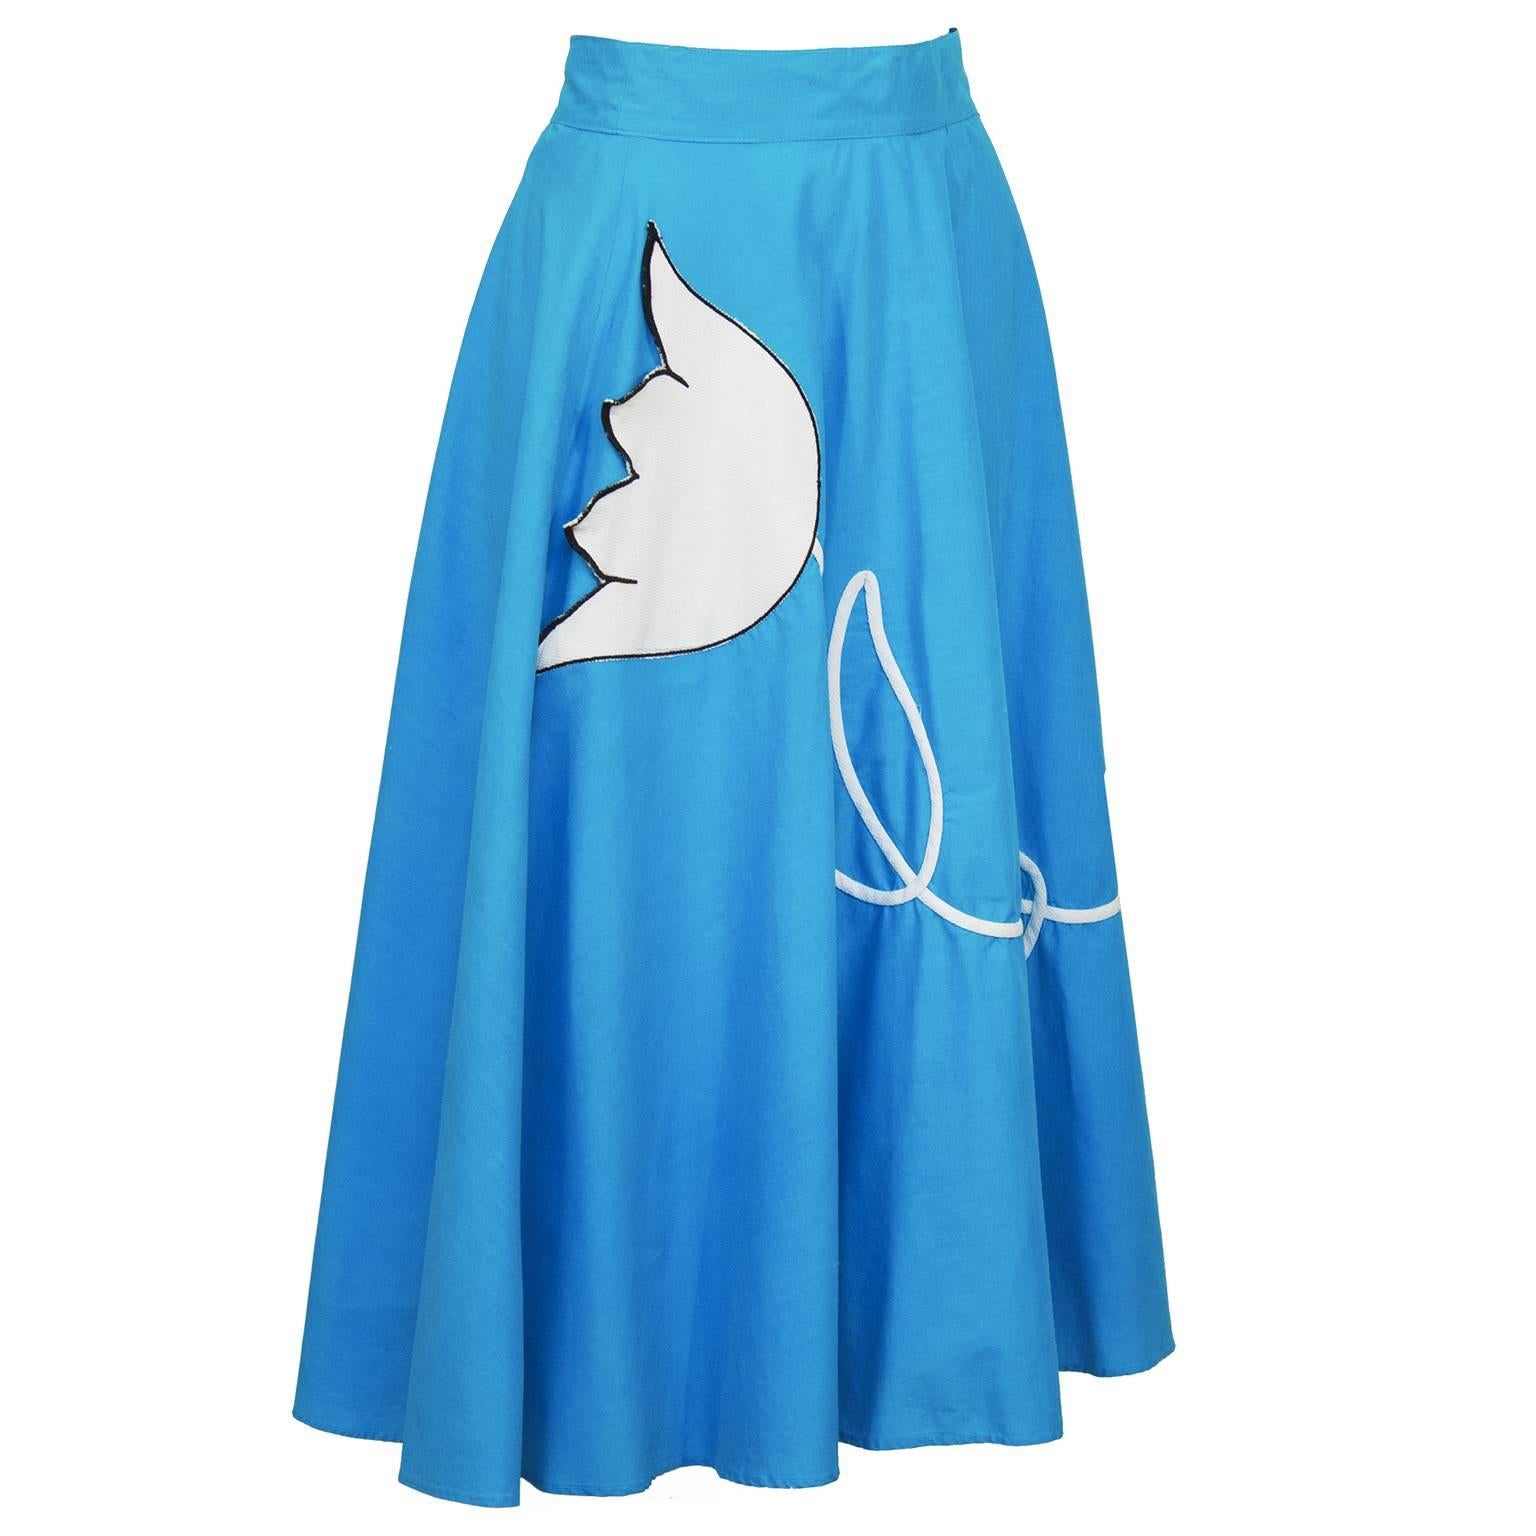 Turquoise cotton circle skirt from the 1960's. The white tulip applique stands out on the blue background and hides a pocket. A white stem twists along the front of the skirt in loops. Banded waist, side zipper. In excellent condition, fits like a